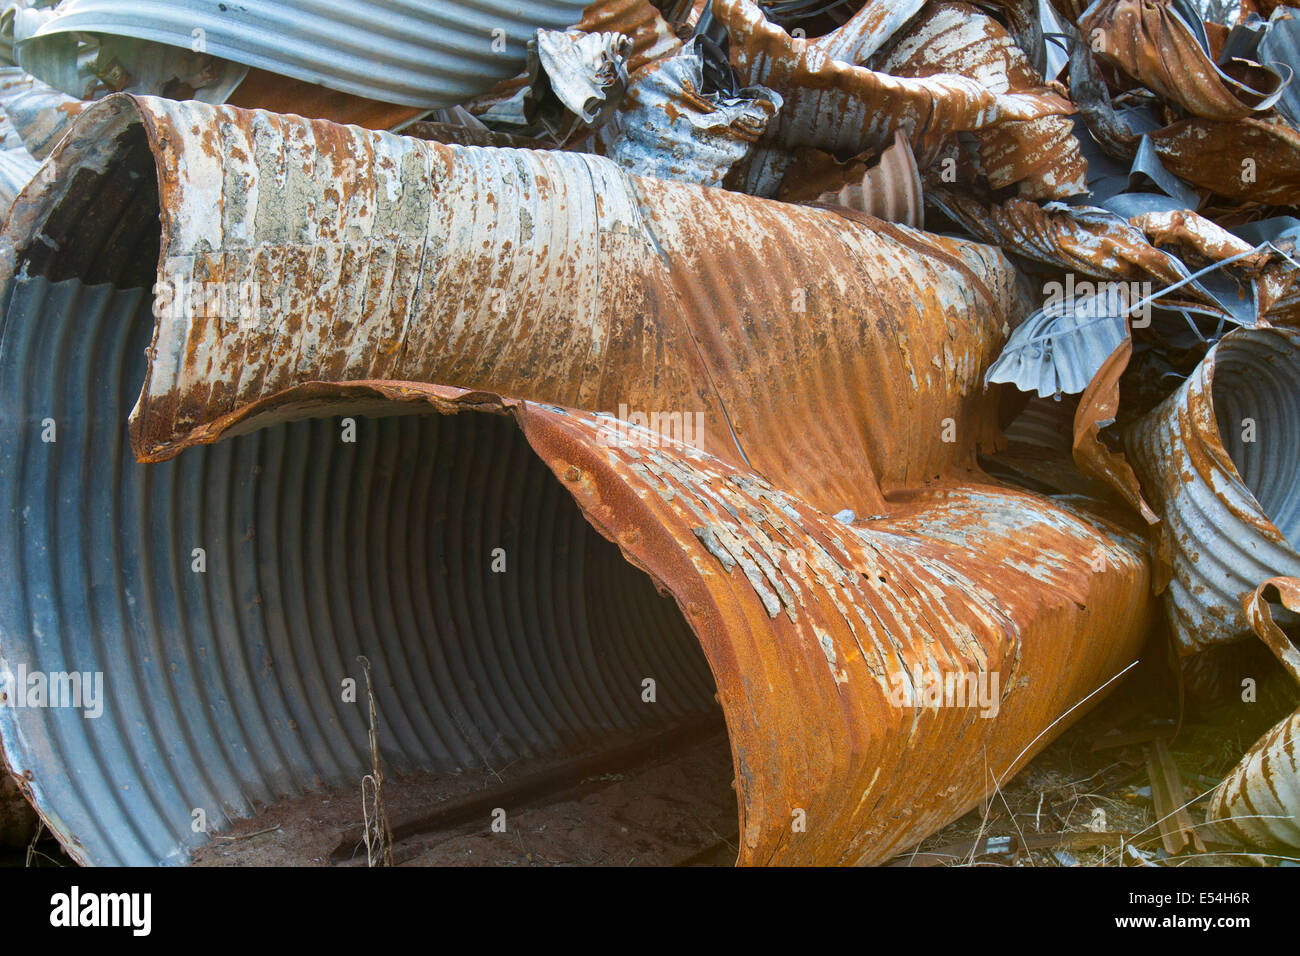 Scrap heap of rusting discarded drainage pipes Stock Photo